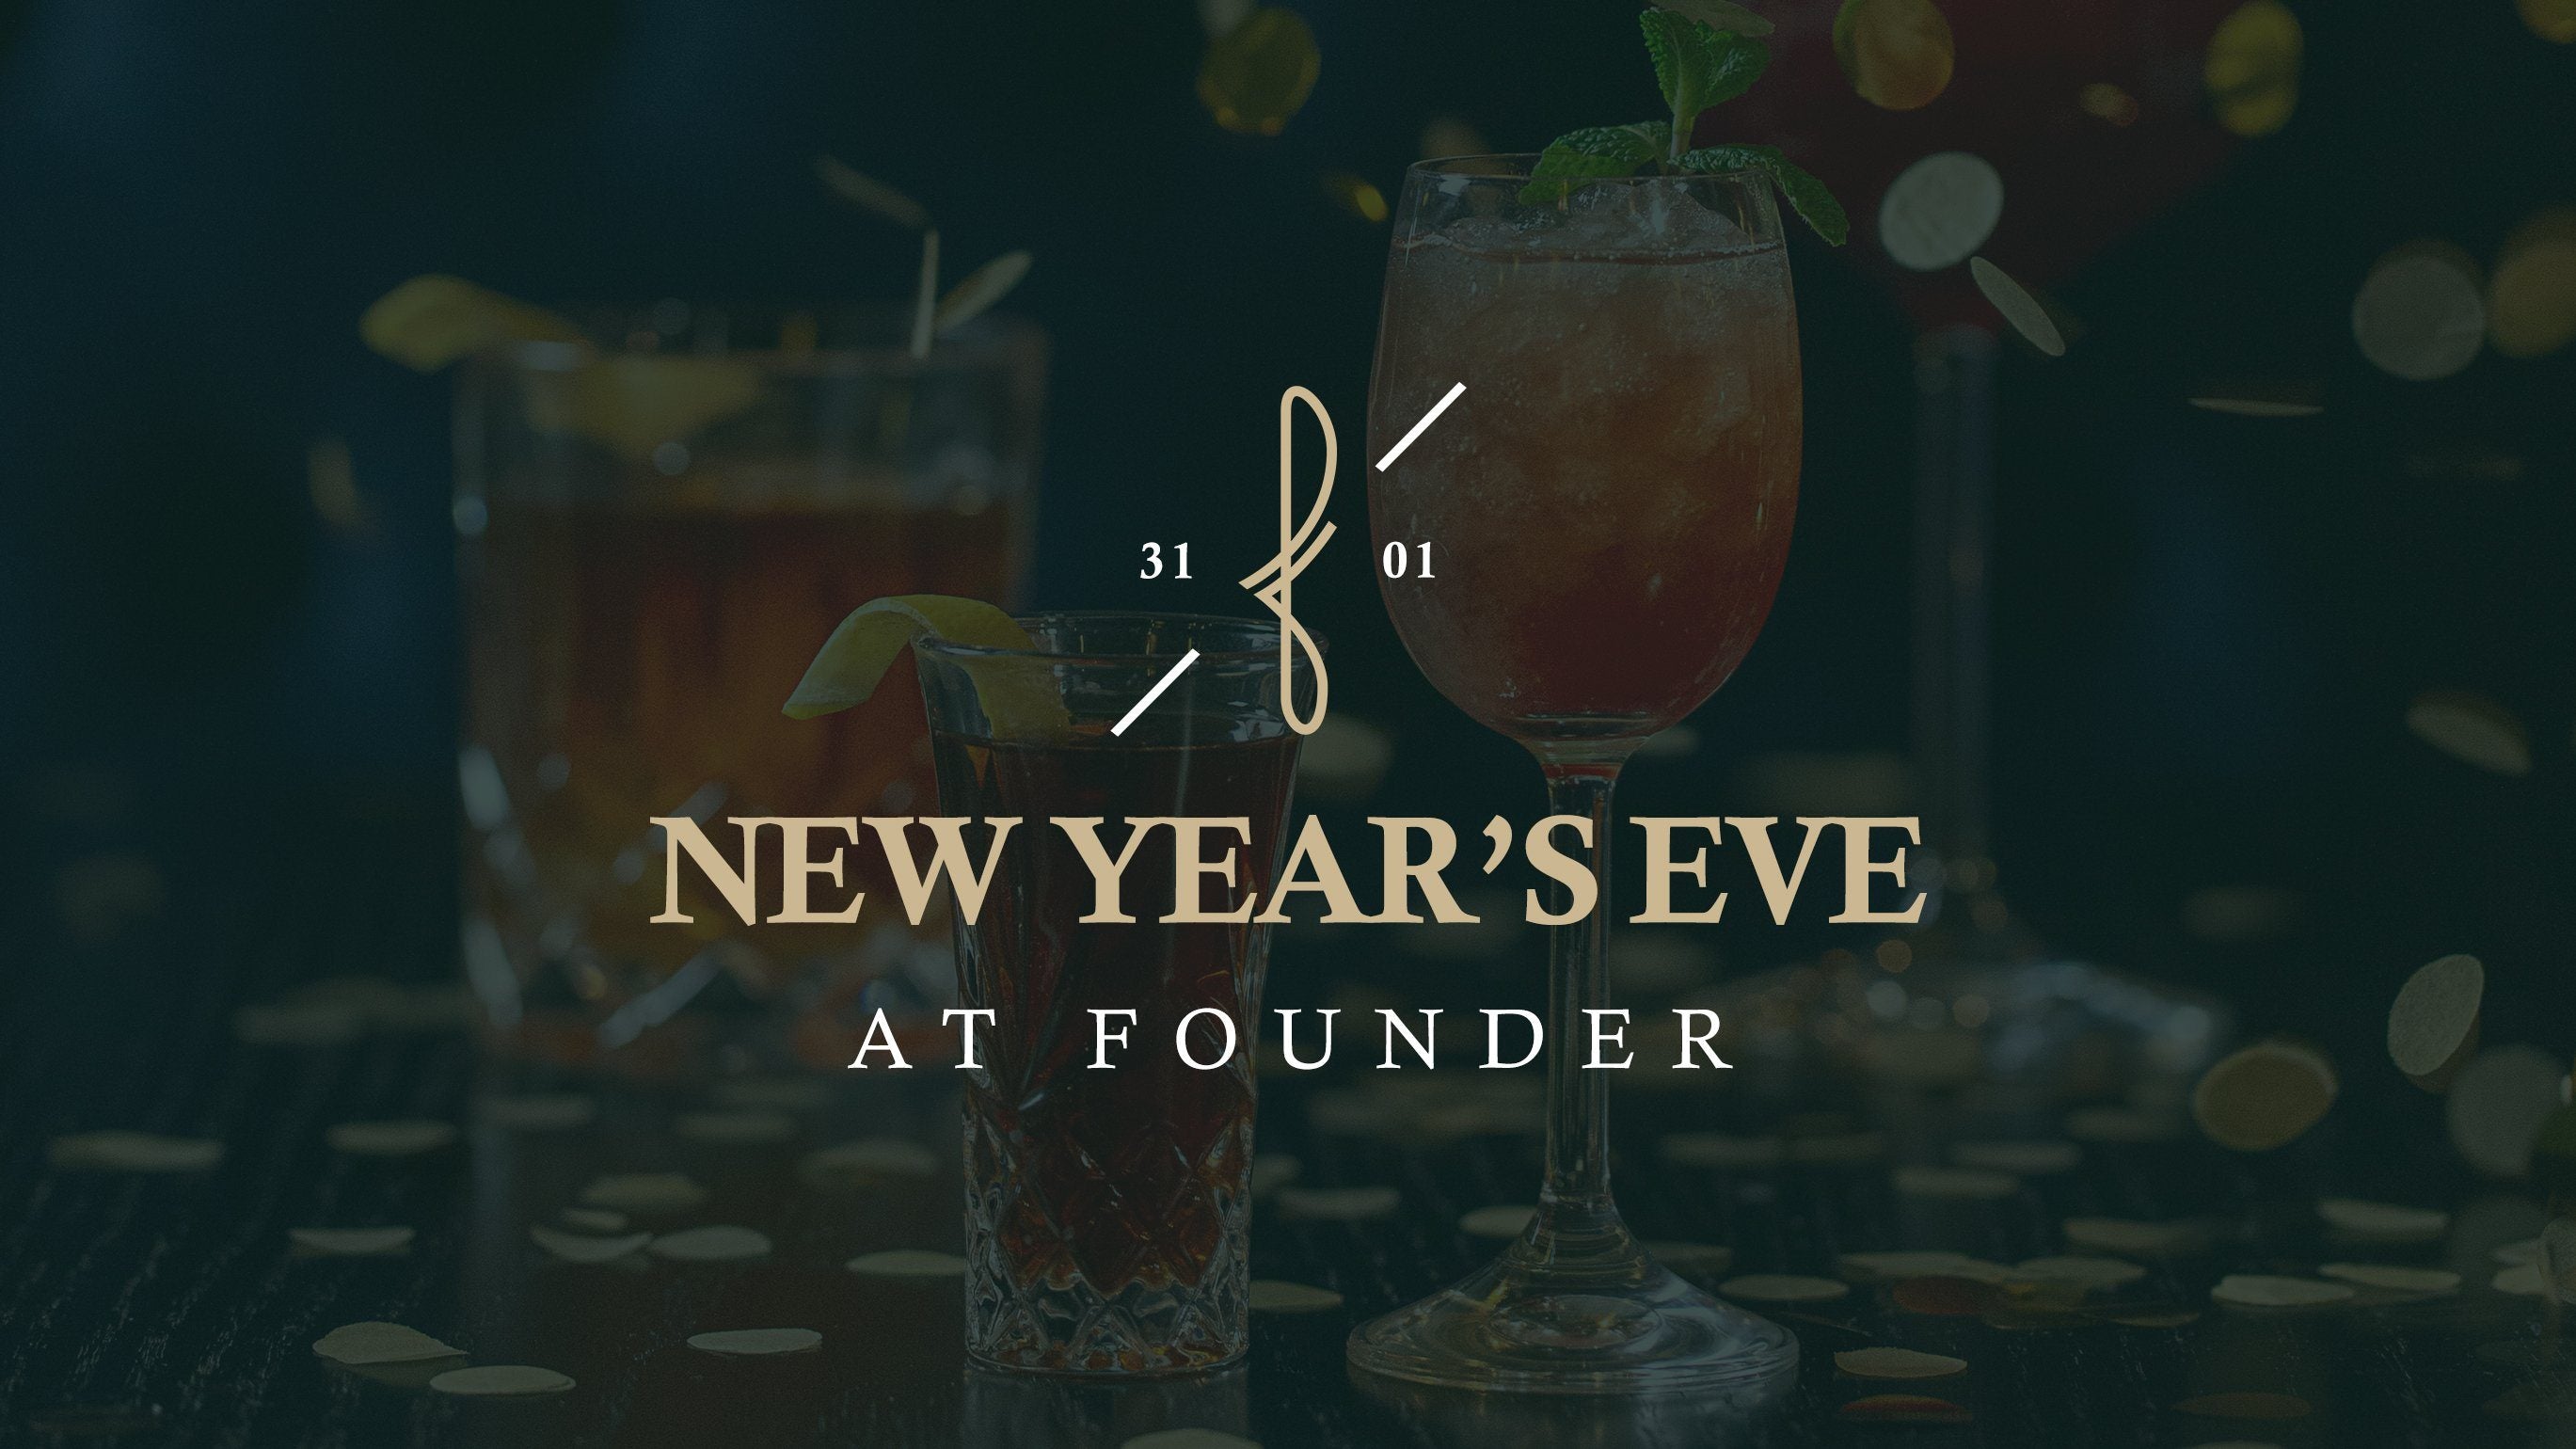 New Year’s Eve at Founder 2018